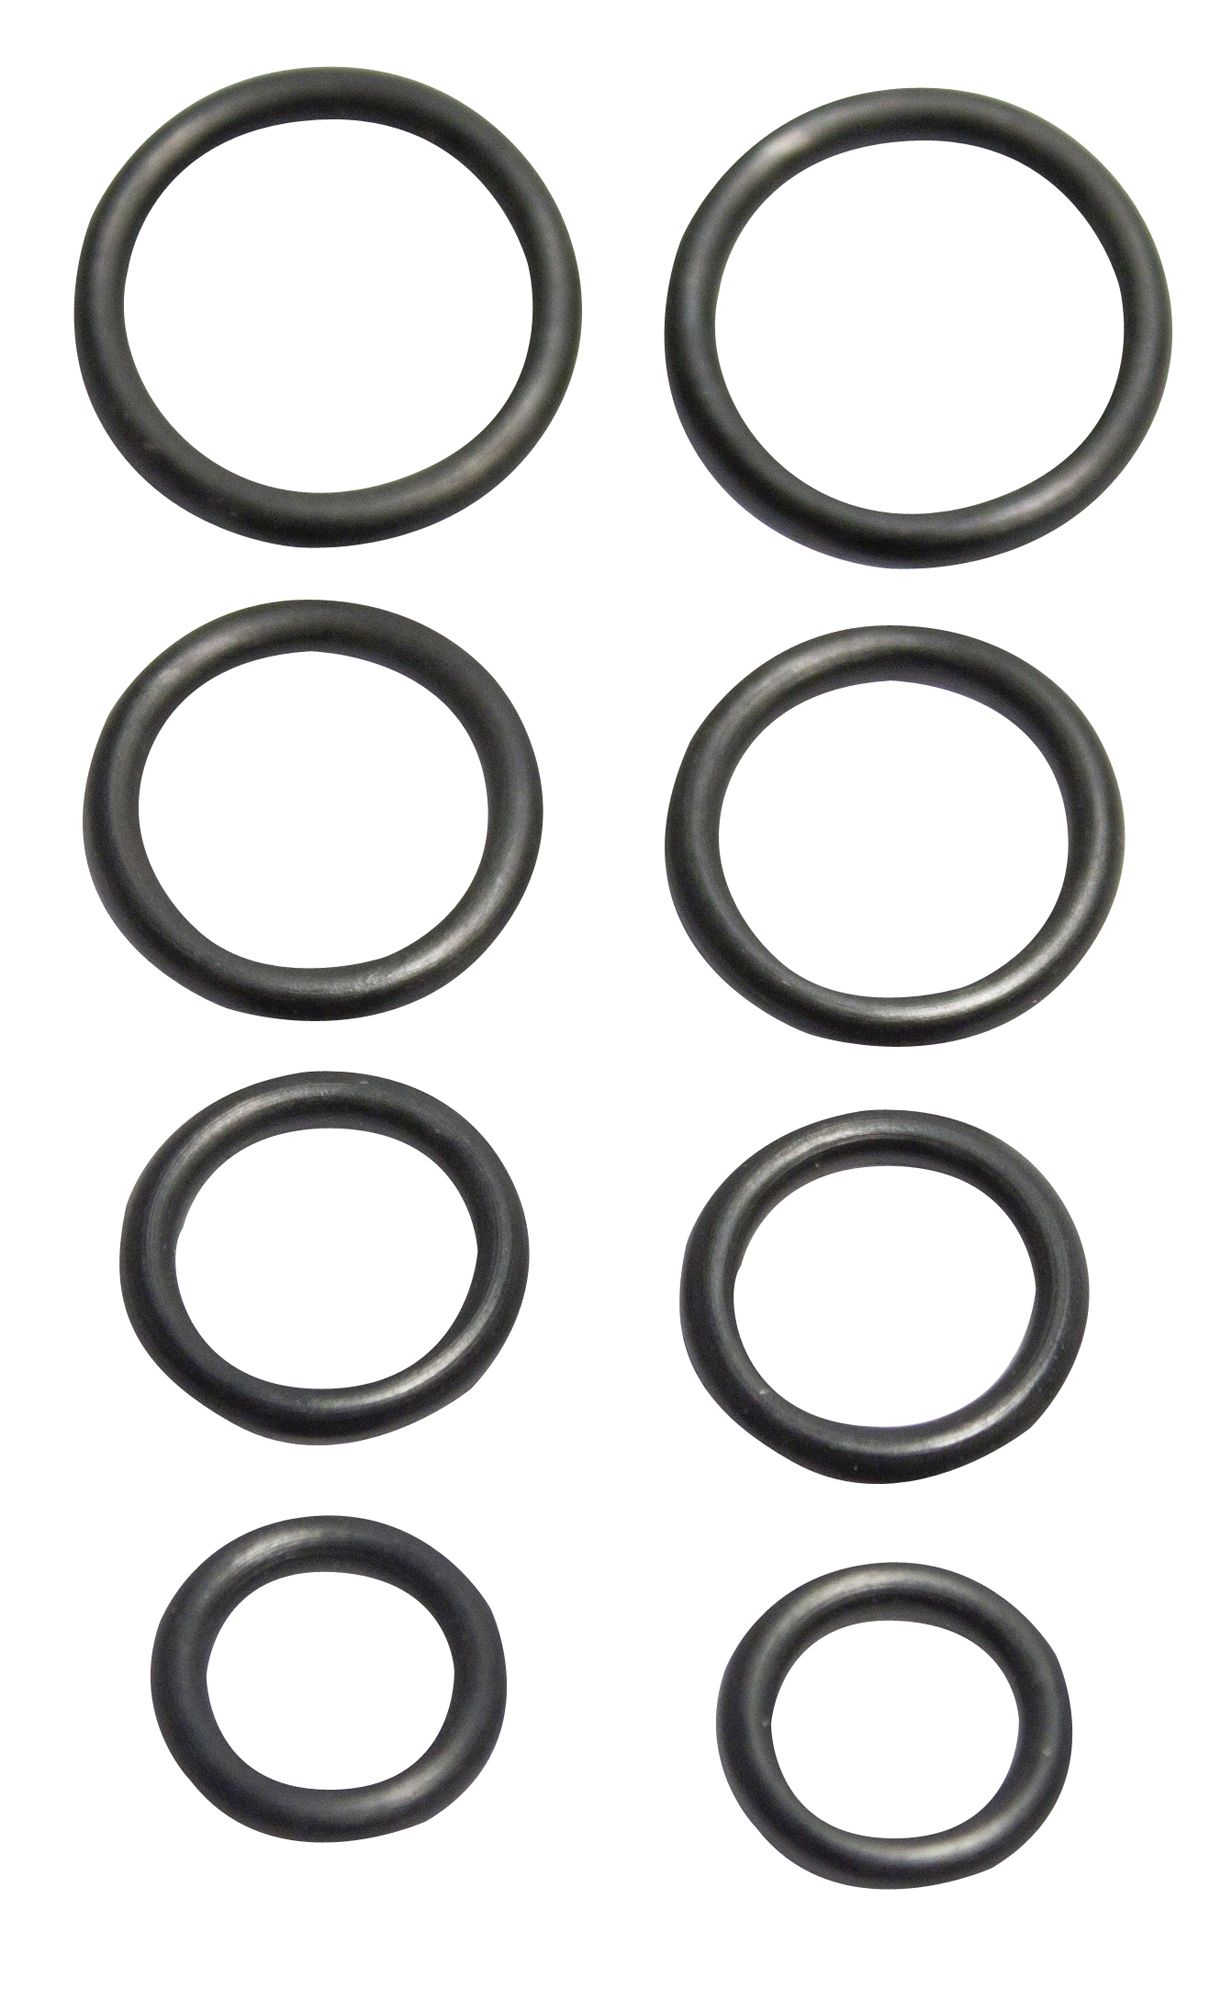 Plumbsure Mixed Rubber O ring, Pack of 8